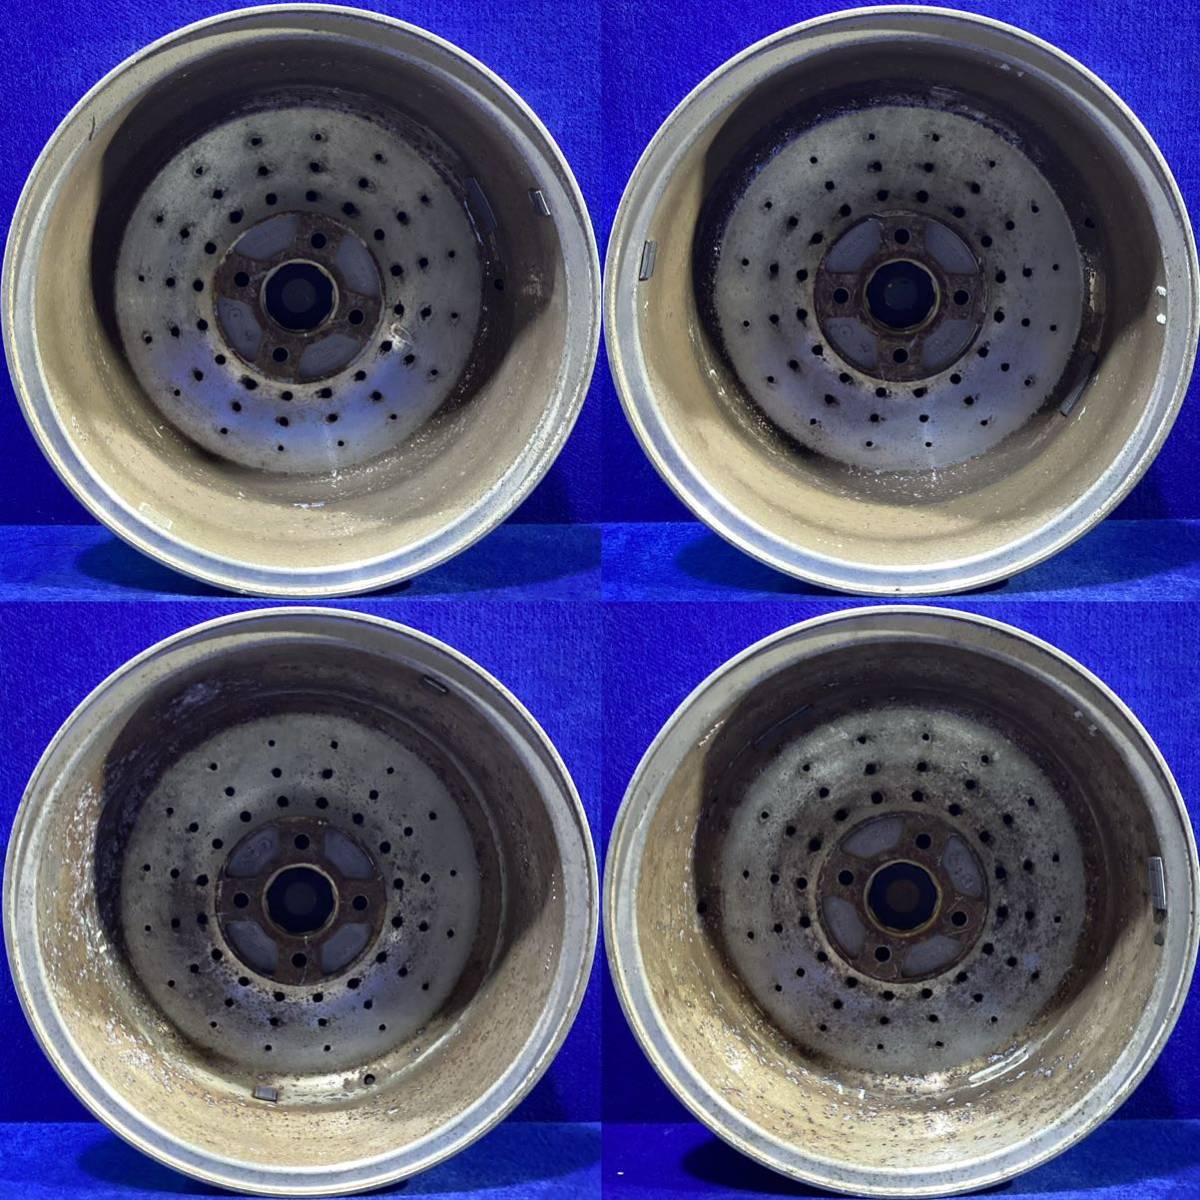  rare!* Manufacturers unknown *15 -inch * old car wheel *15x5J/ offset approximately +48/PCD100-4H*4 pcs set * that time thing!